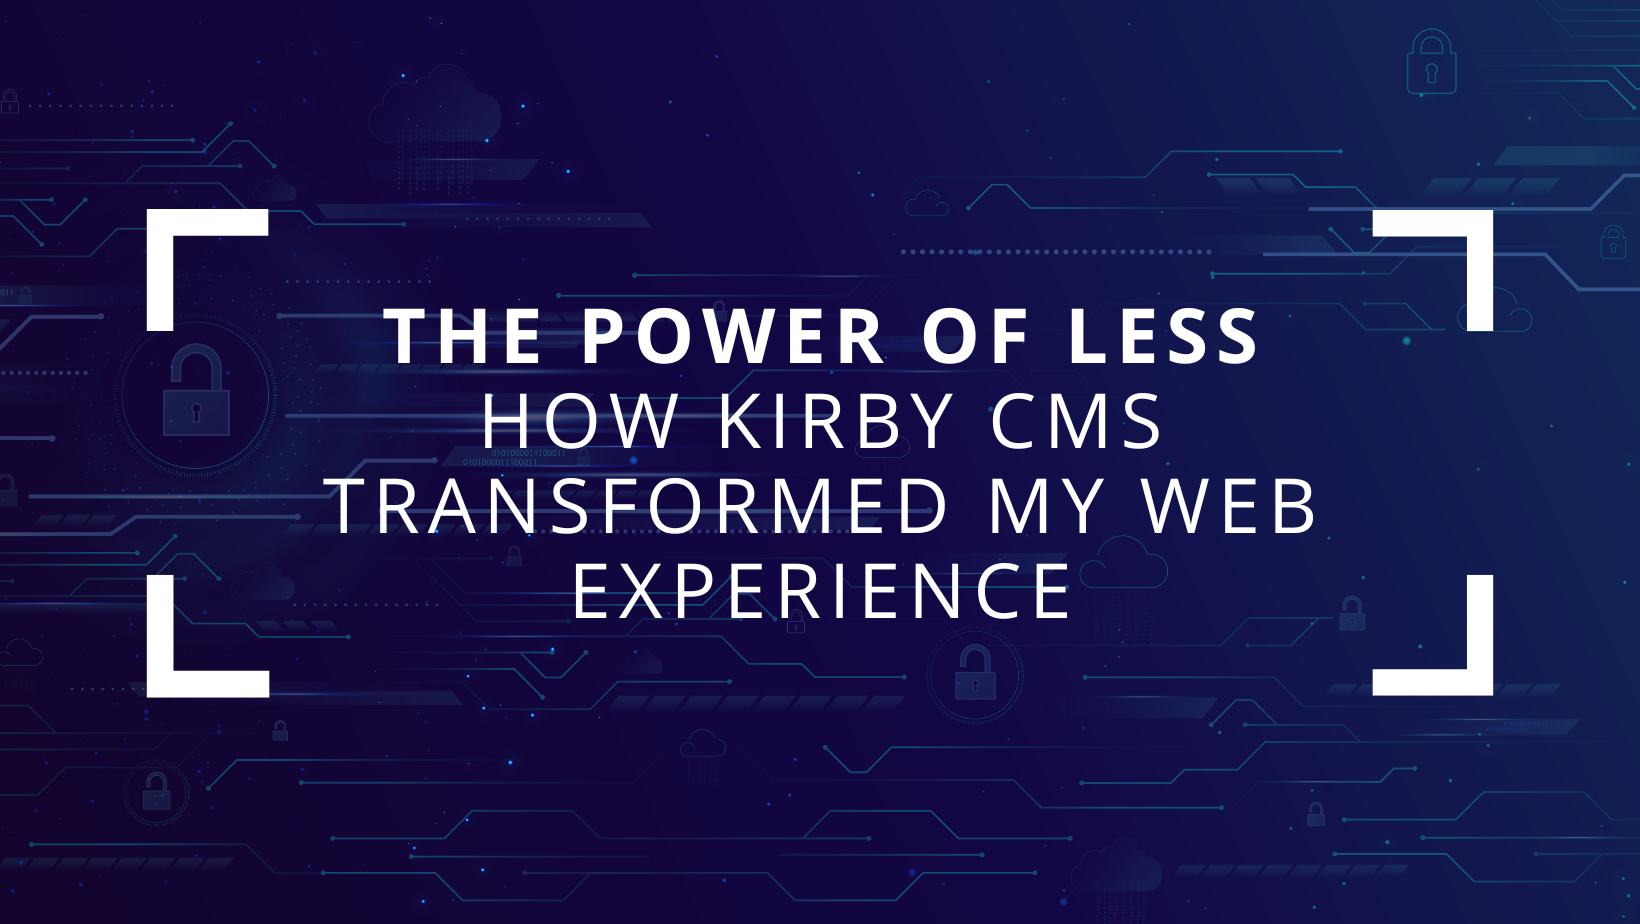 The Power of Less: How Kirby CMS Transformed My Web Experience